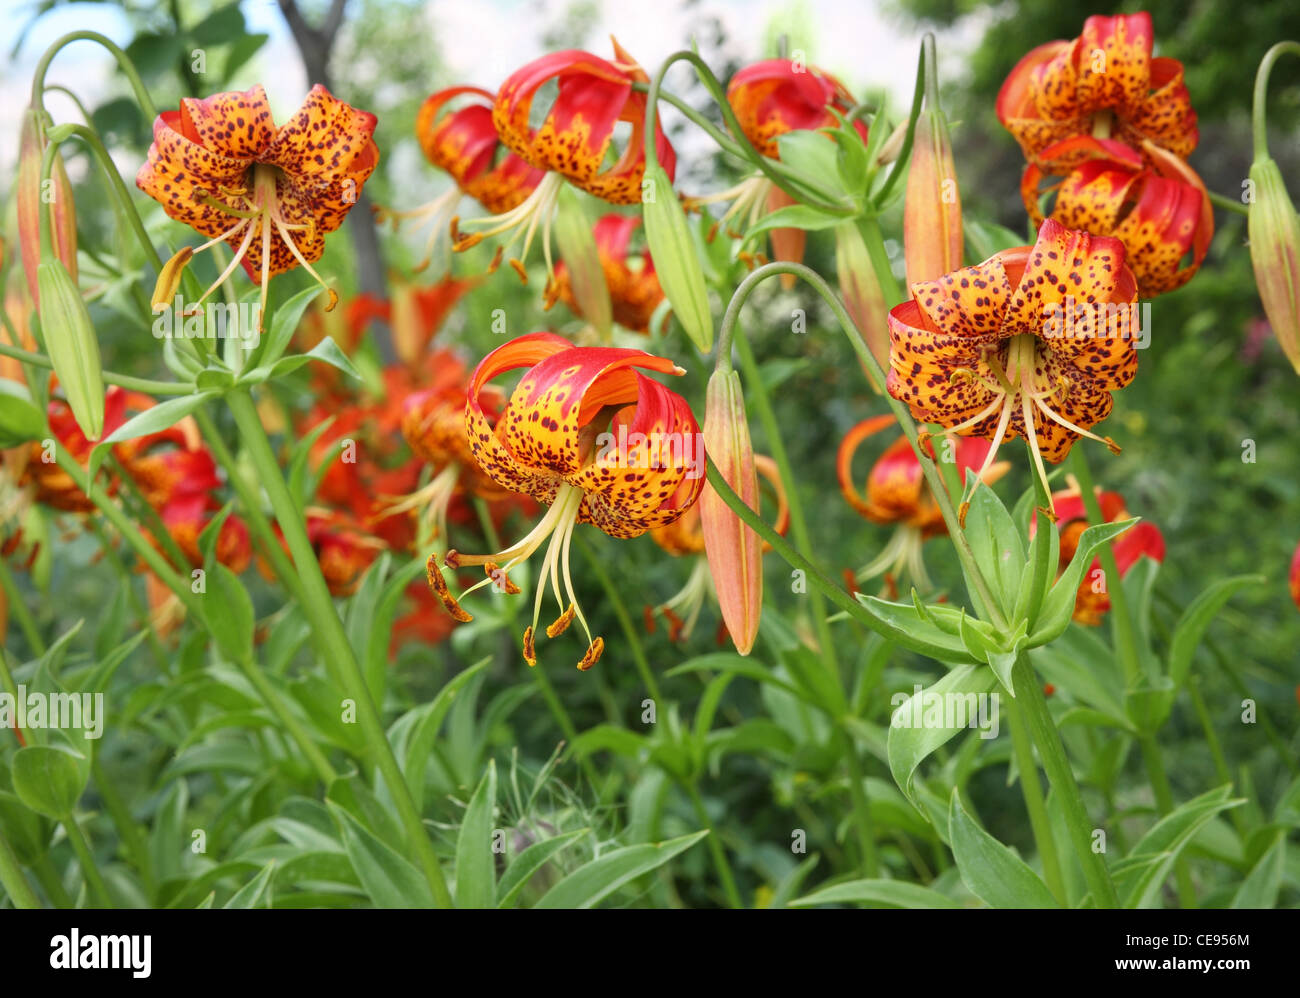 patch of unique red and yellow flowers growing in garden setting Stock Photo